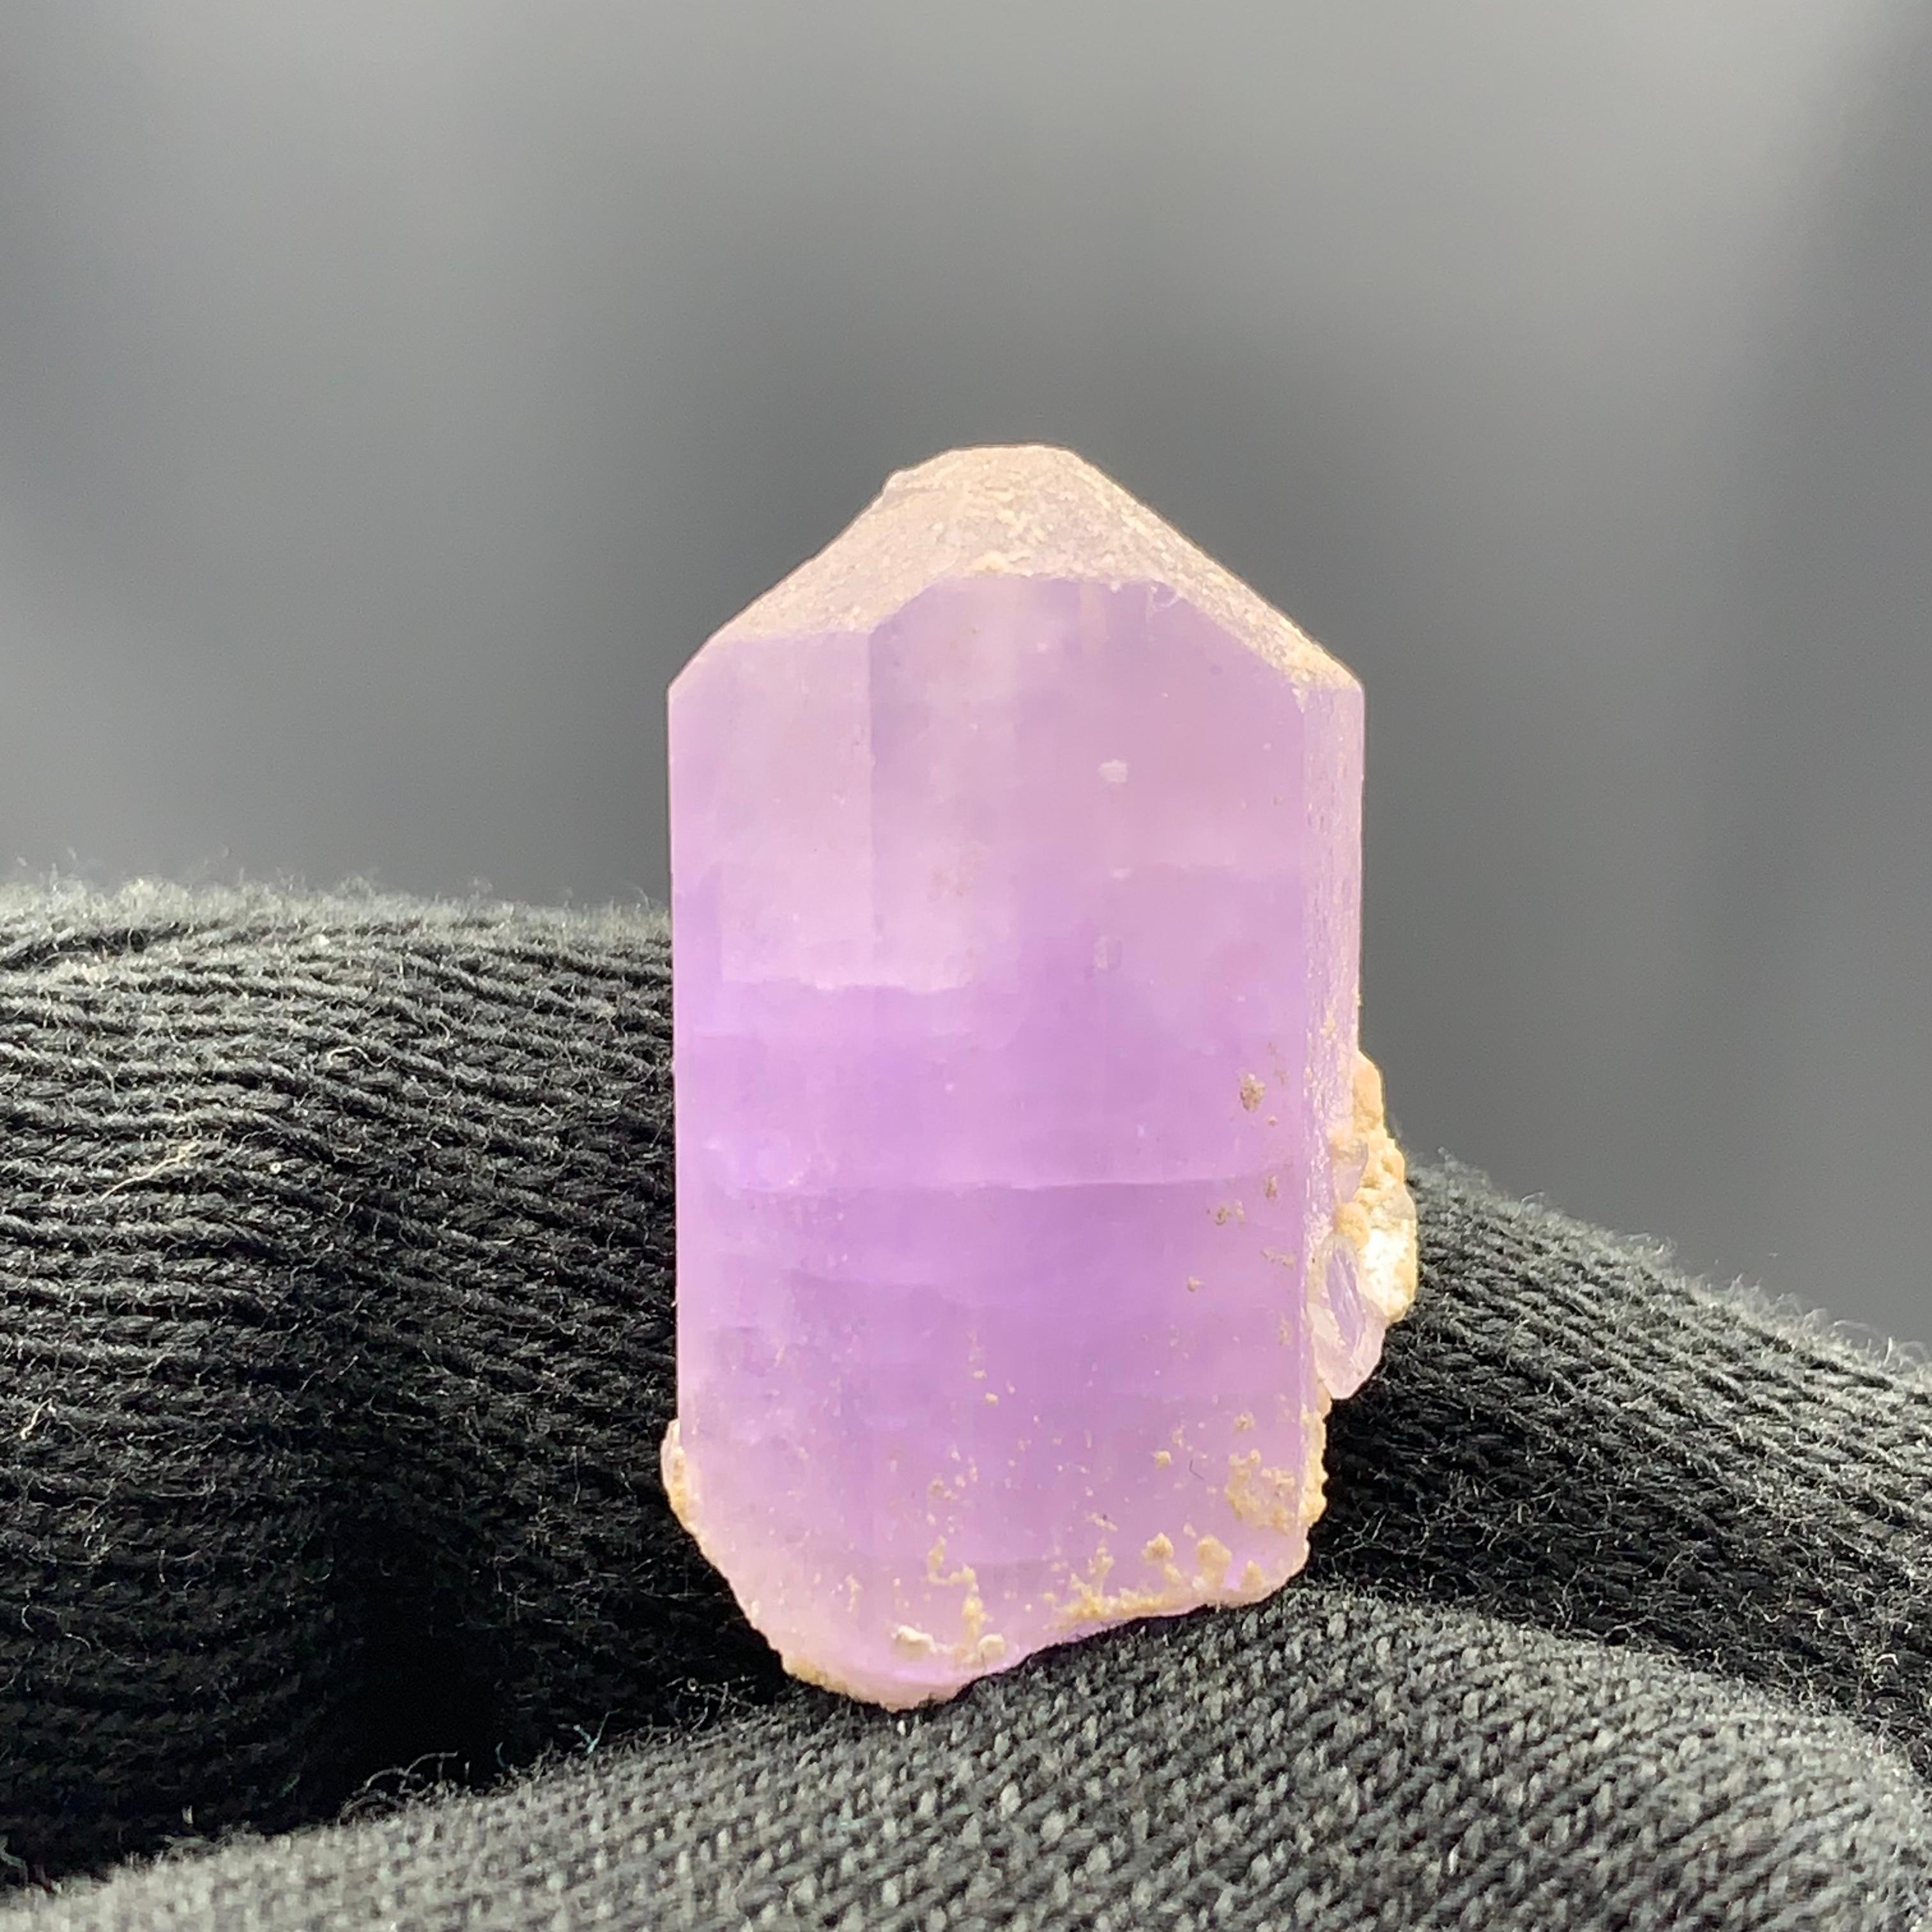 Lovely Fluorite Crystal From Afghanistan 
Weight: 33.40 Carat
Dim: 2.6 x 1.6 x 1.1 Cm 
Origin : Afghanistan 

Fluorite is the mineral form of calcium fluoride, CaF₂. It belongs to the halide minerals. It crystallizes in isometric cubic habit,